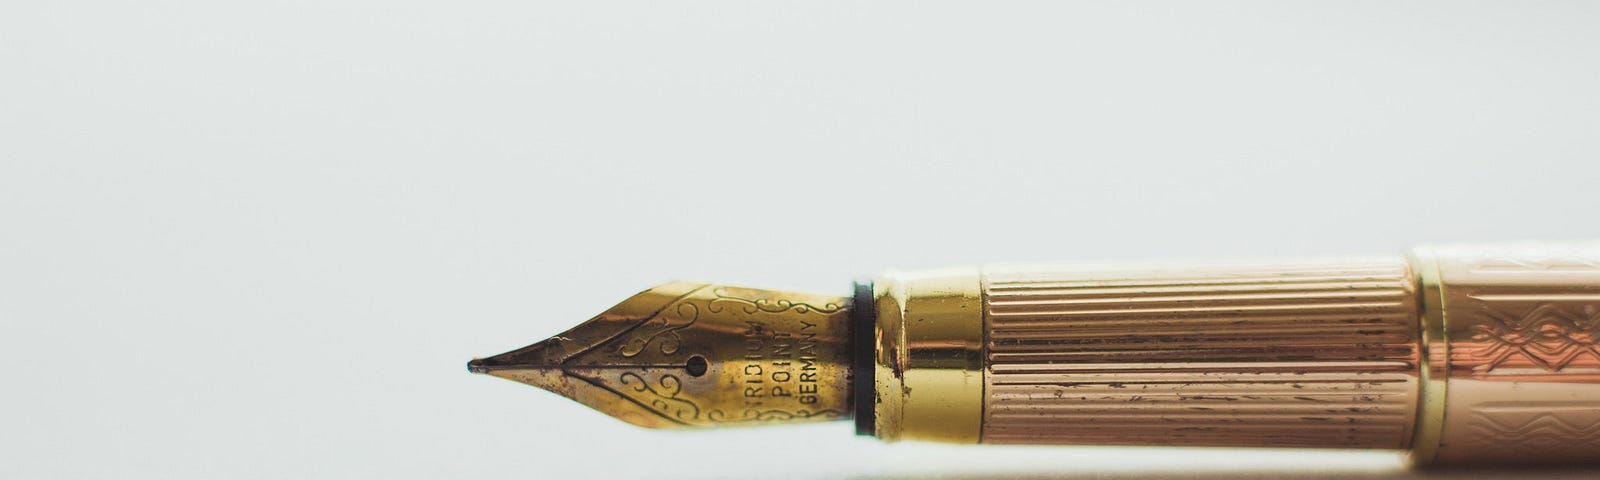 A gold fountain pen on a white background.